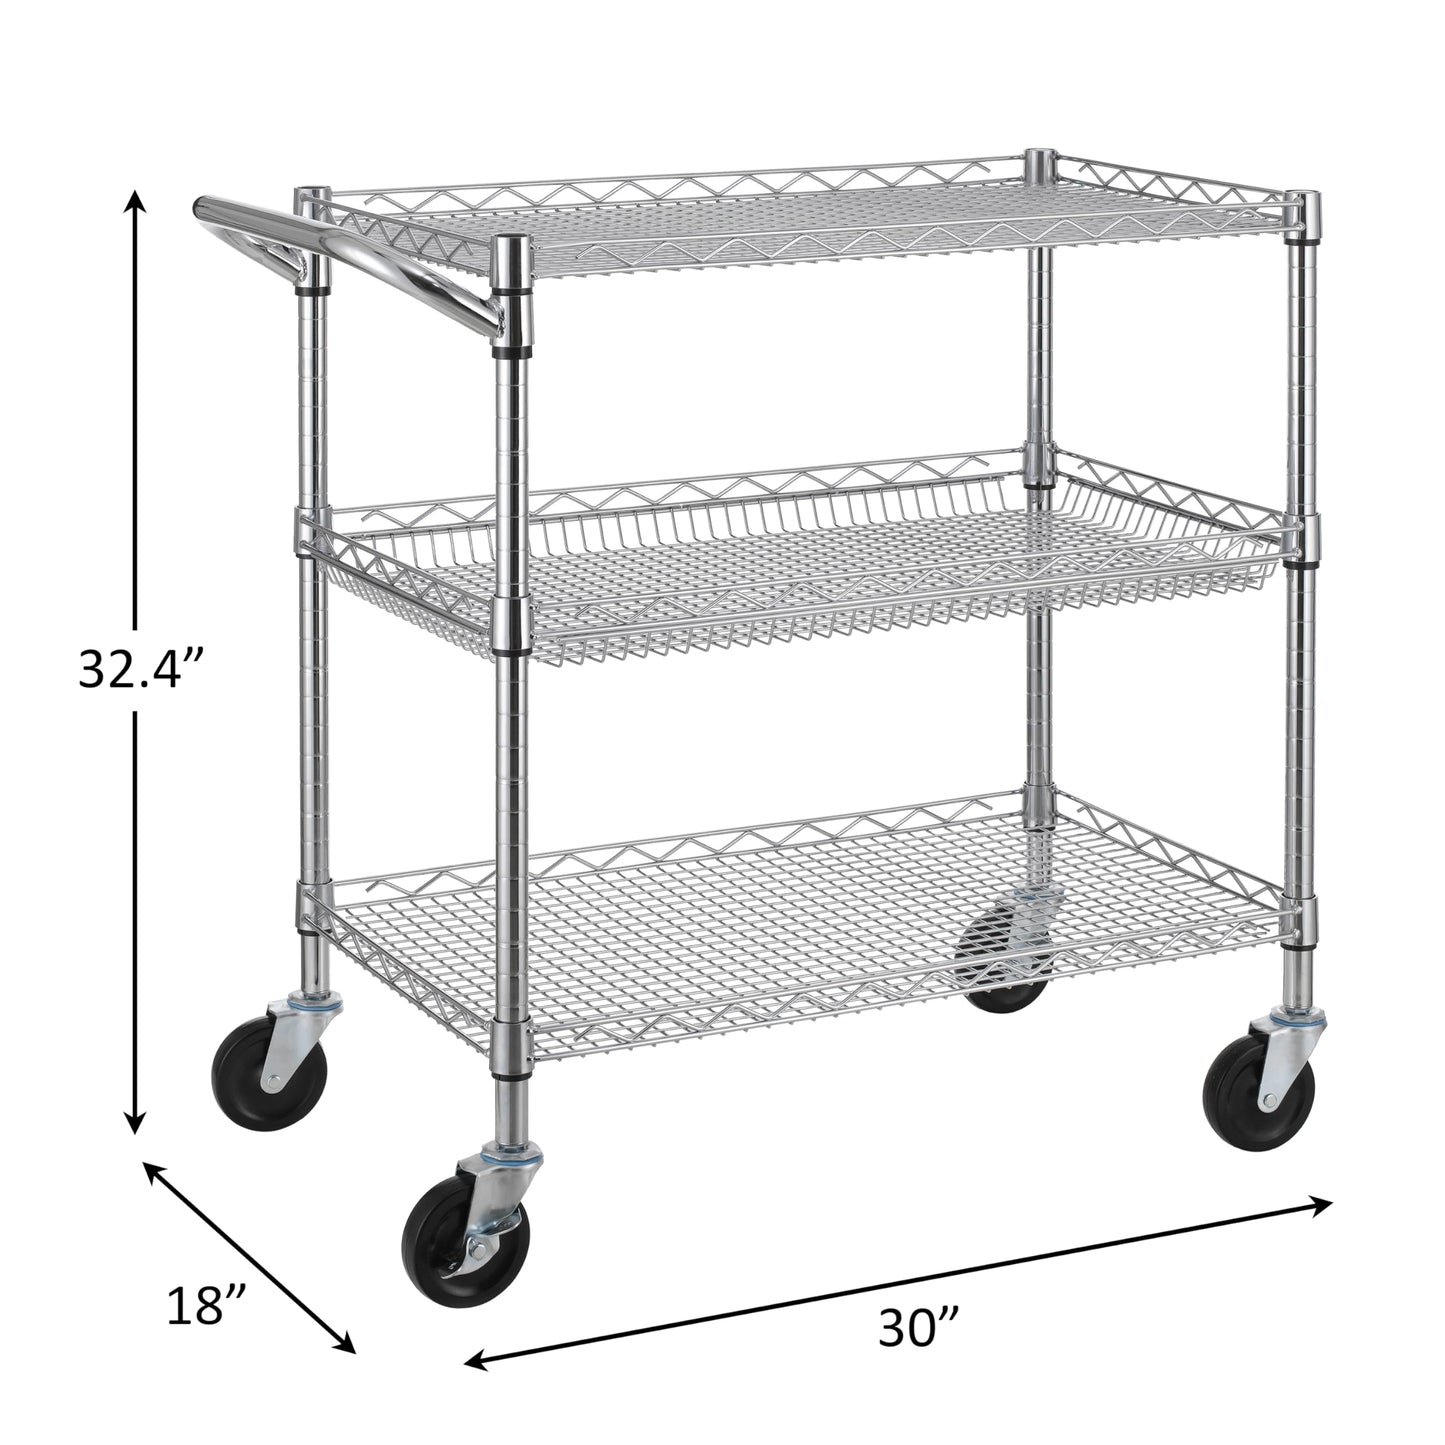 Finnhomy 3 Tier Heavy Duty Commercial Grade Utility Cart, Wire Rolling Cart with Handle Bar, Steel Service Cart with Wheels, Utility Shelf Plant